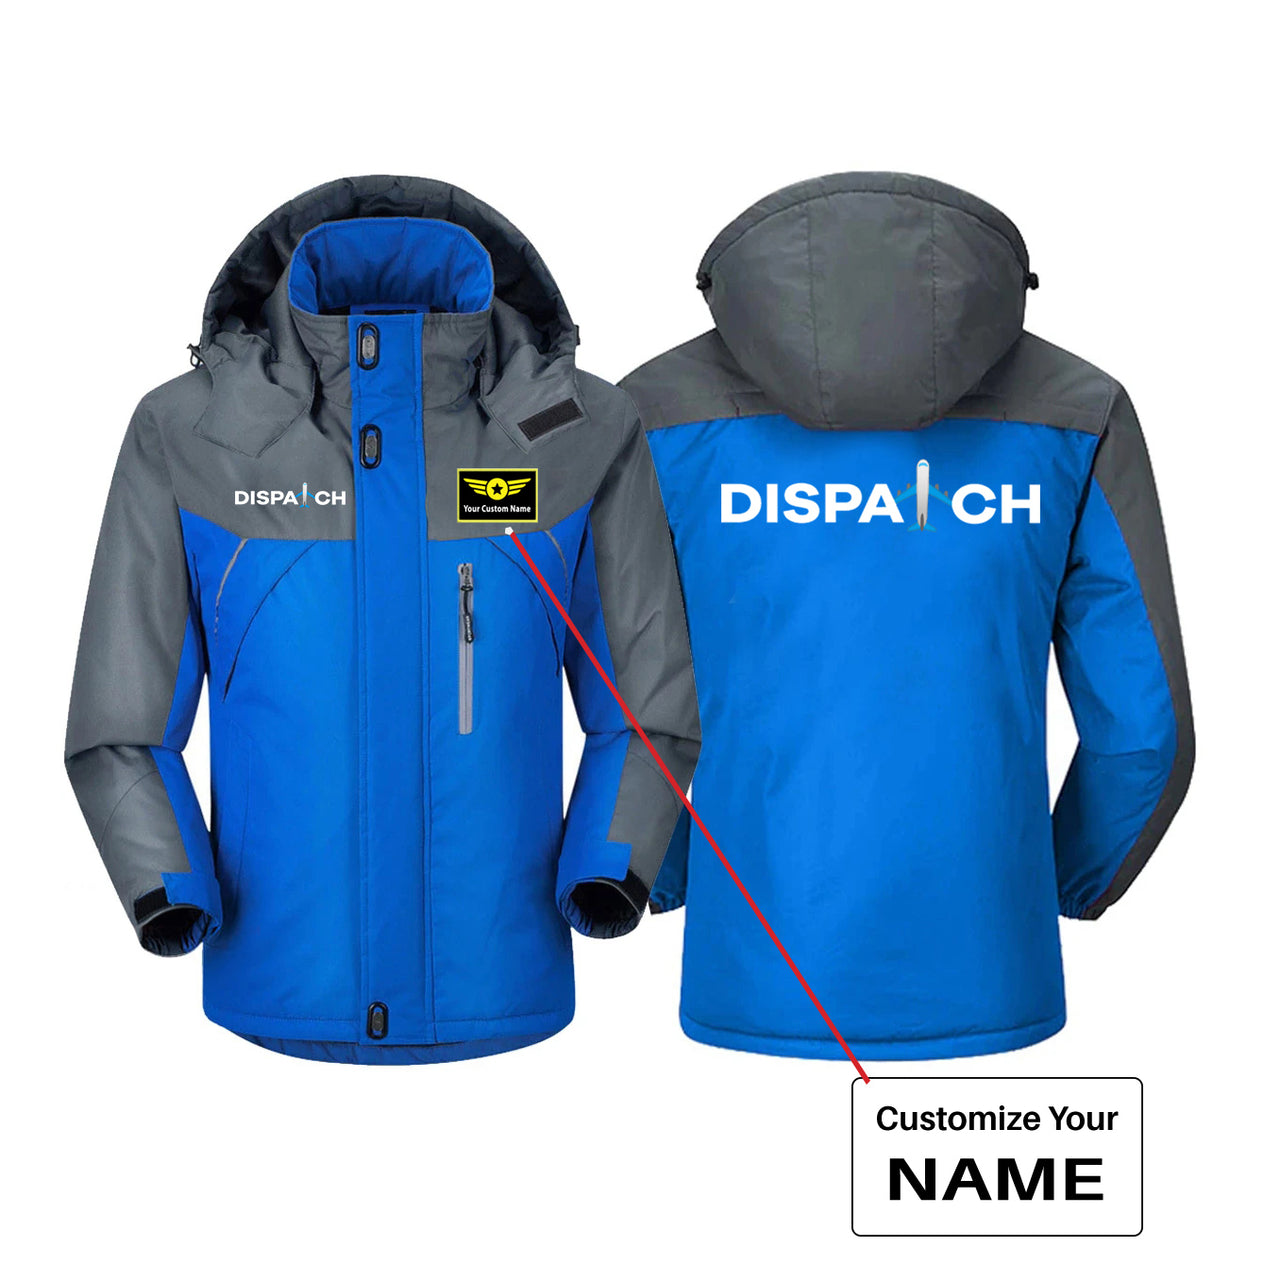 Dispatch Designed Thick Winter Jackets